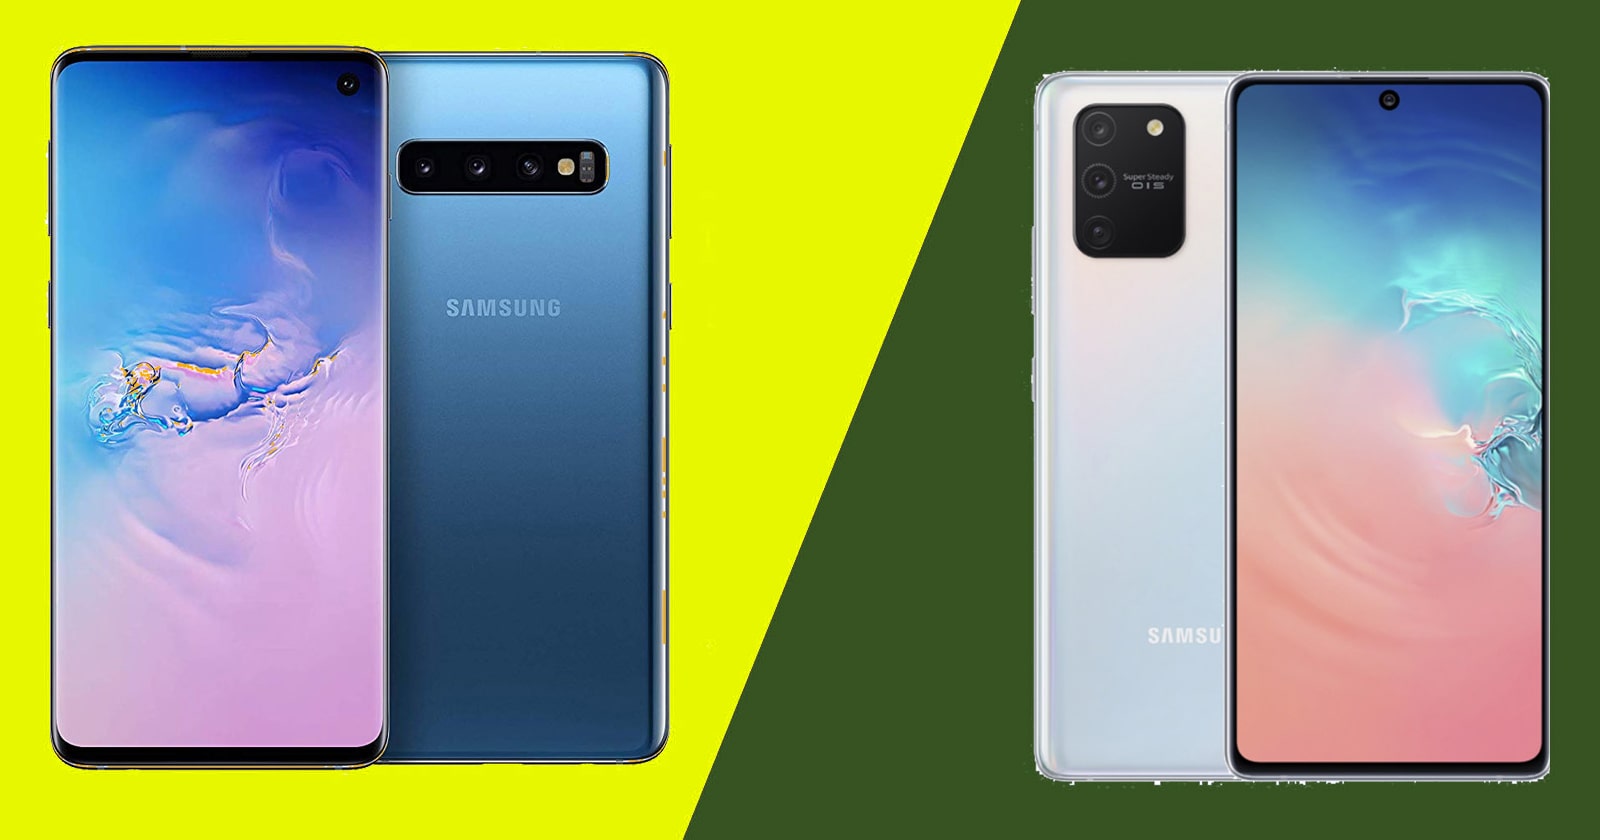 What is the difference between Samsung s10 and s10 lite?